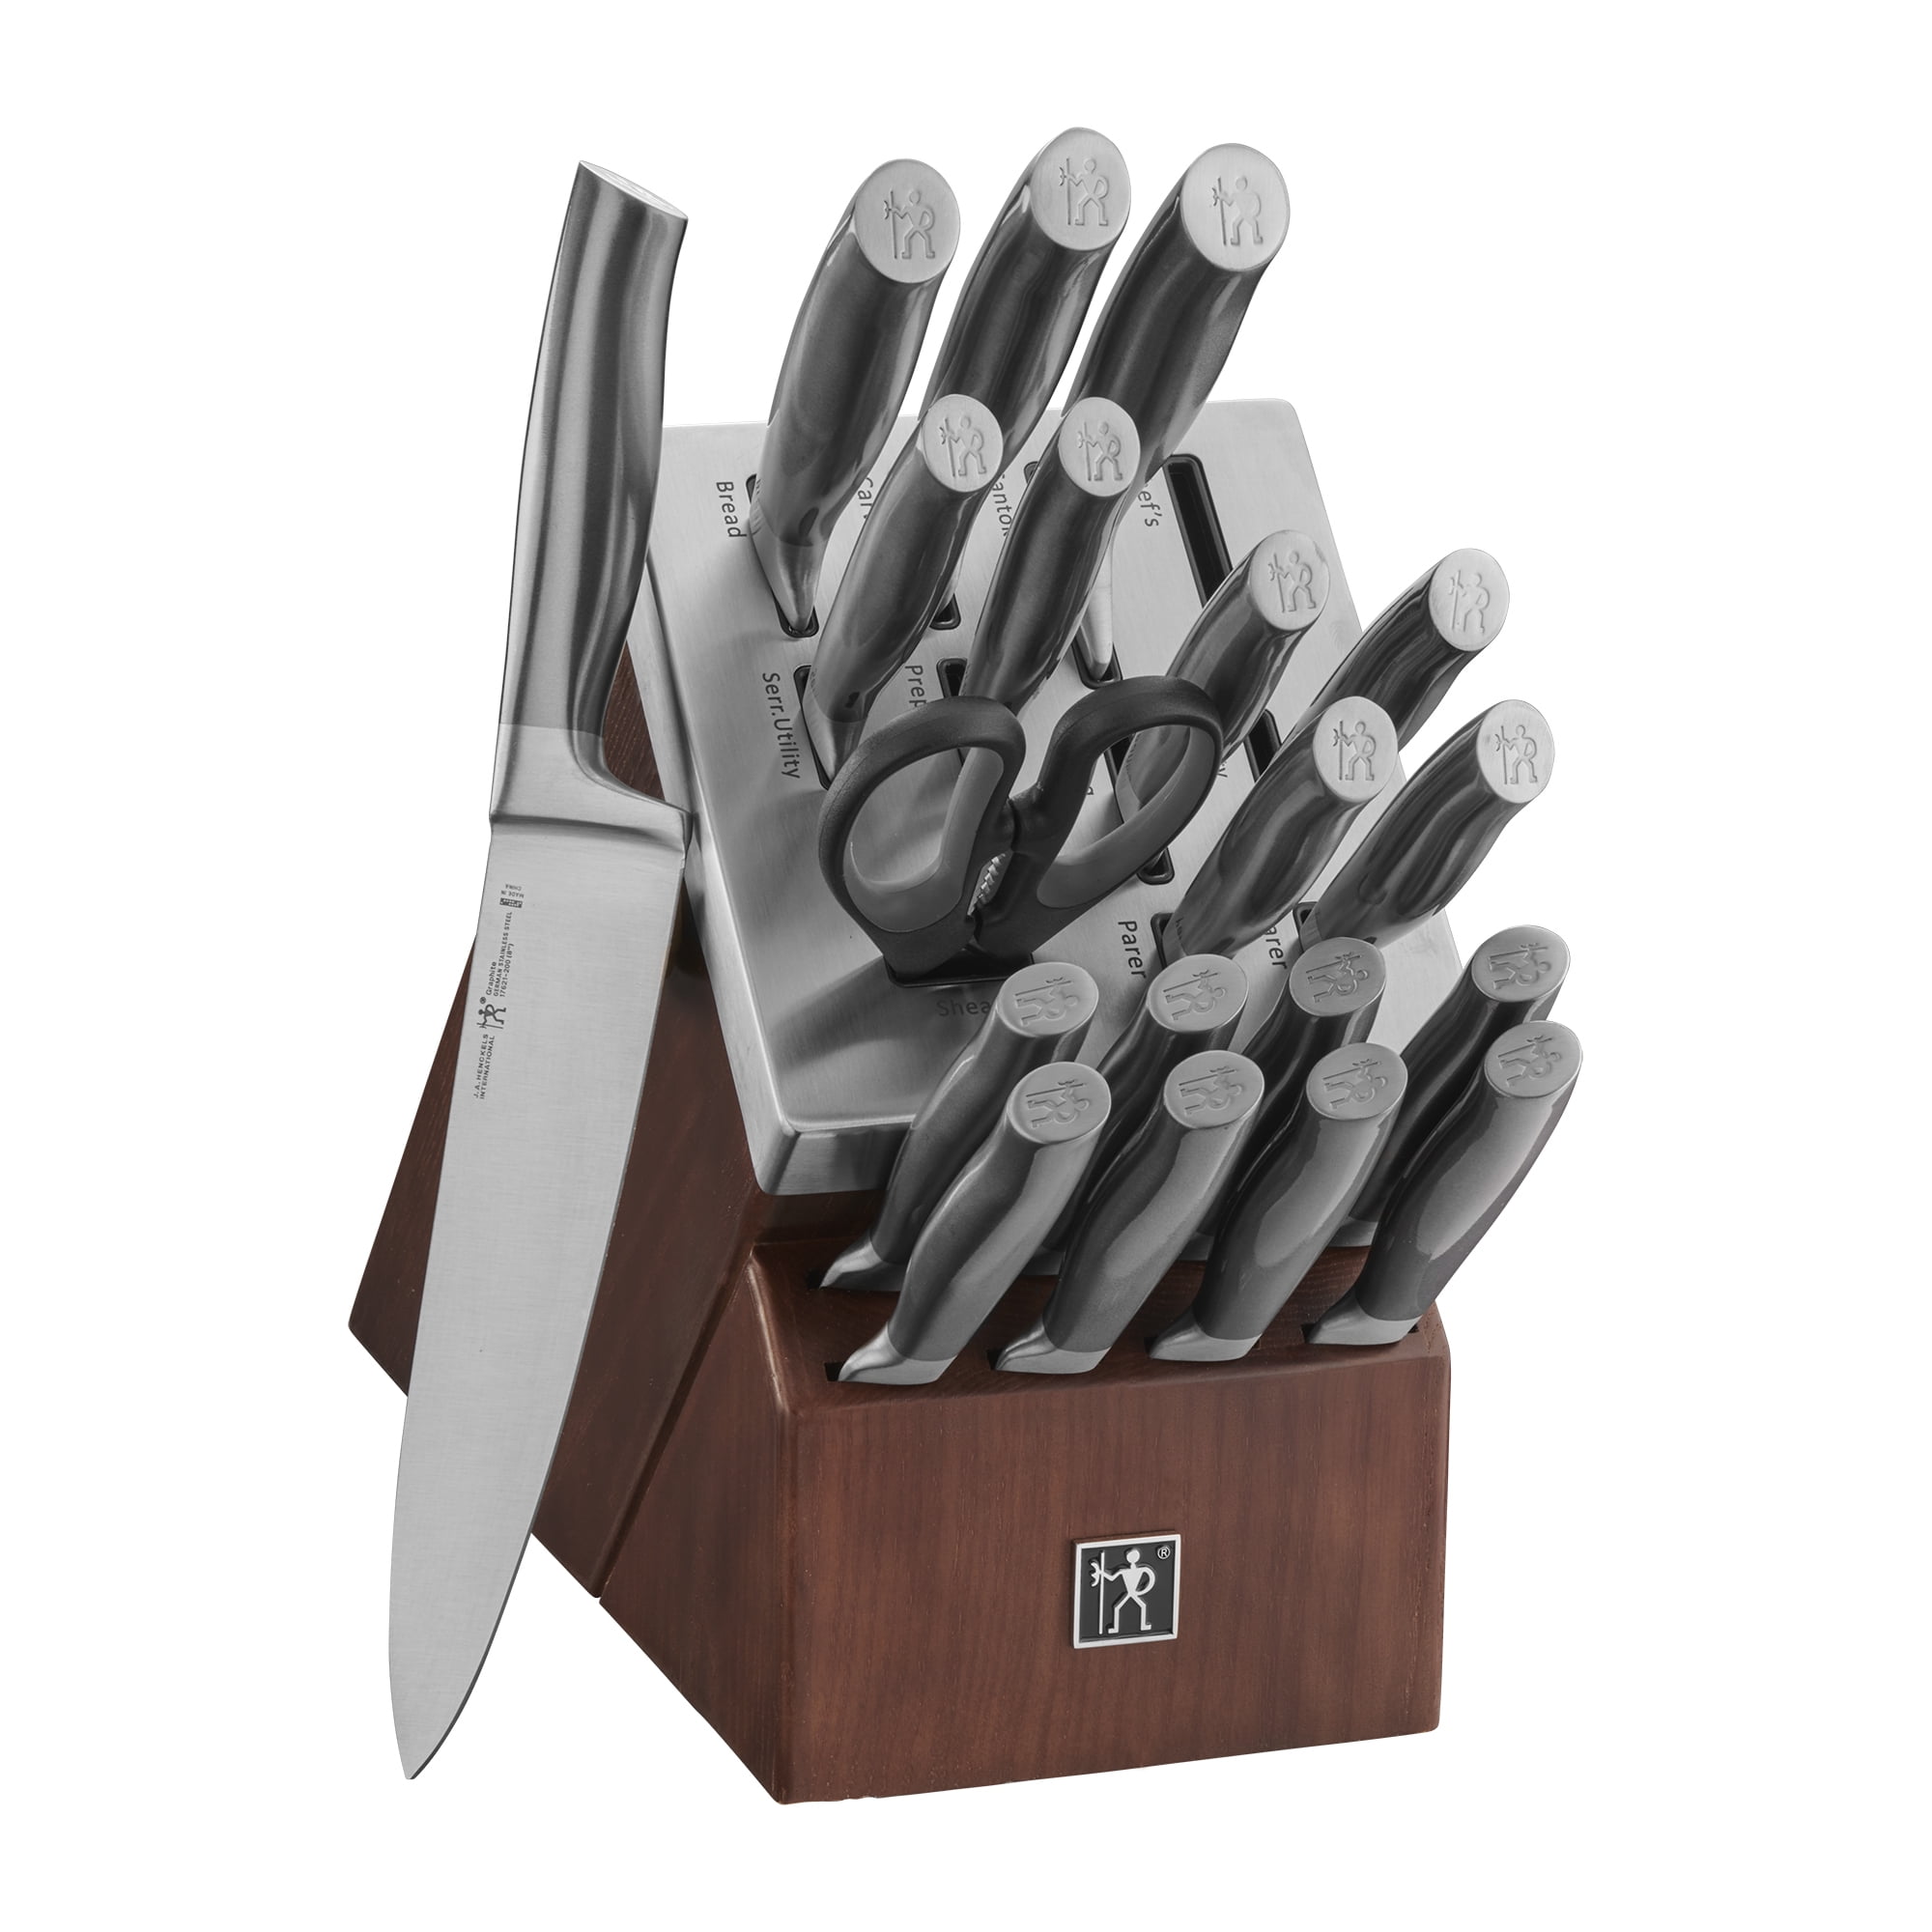 HOME HERO 12 Piece Kitchen Knife Set and Sharpener - INCOMPLETE